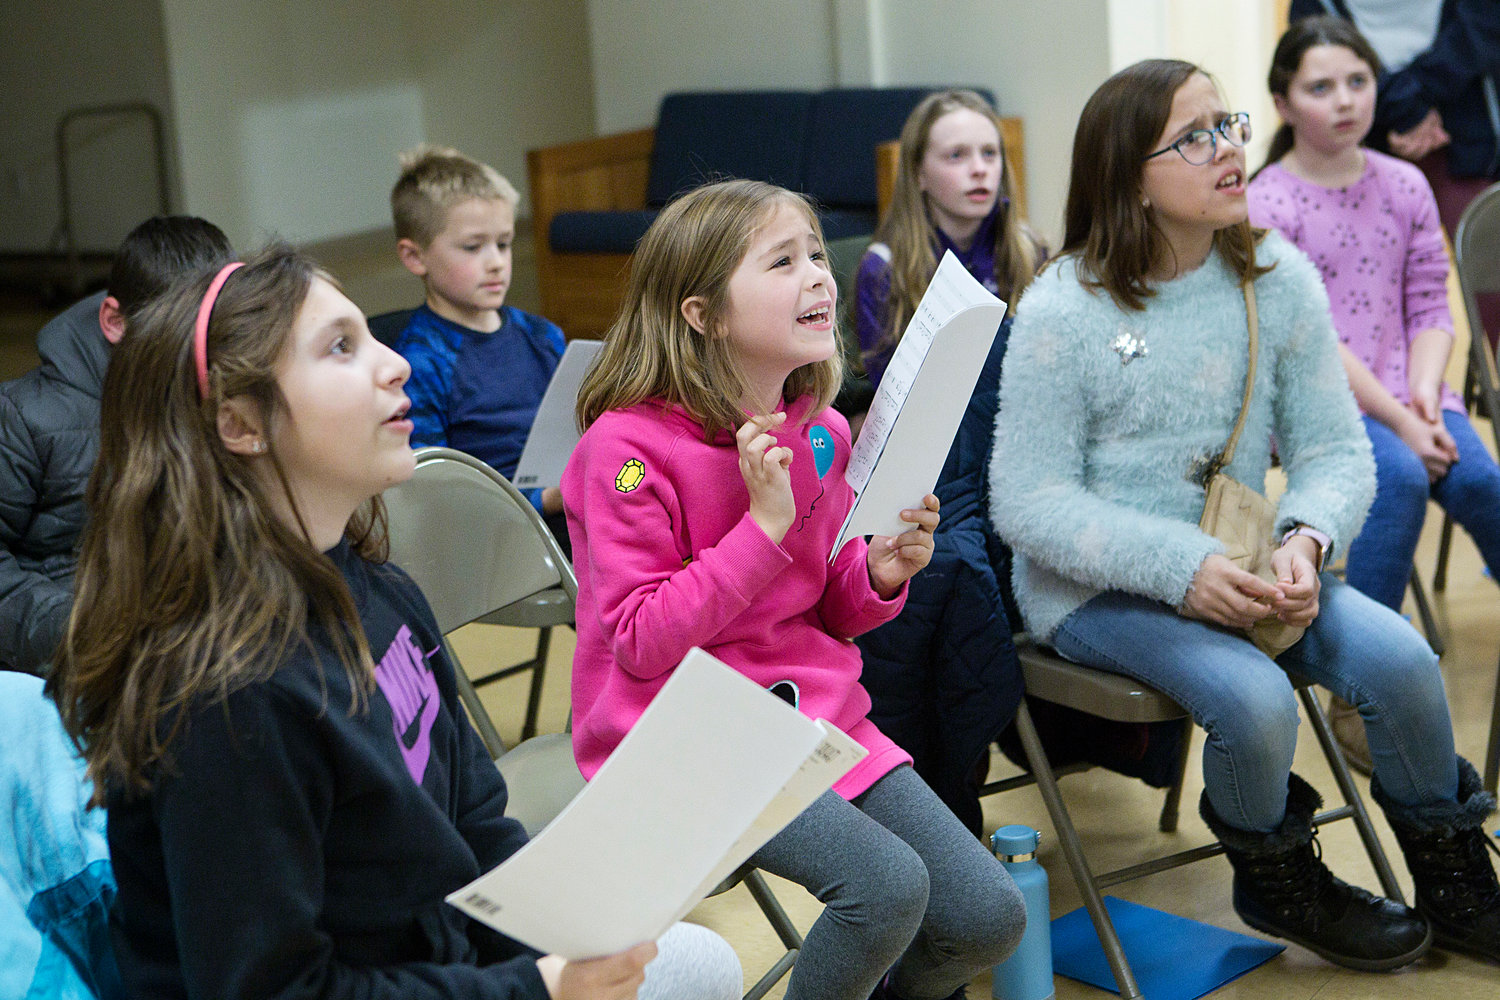 Reagan Applegate of Portsmouth (middle) shows some expression while rehearsing with the Newport County Youth Choir at St. Mary’s Church last week.